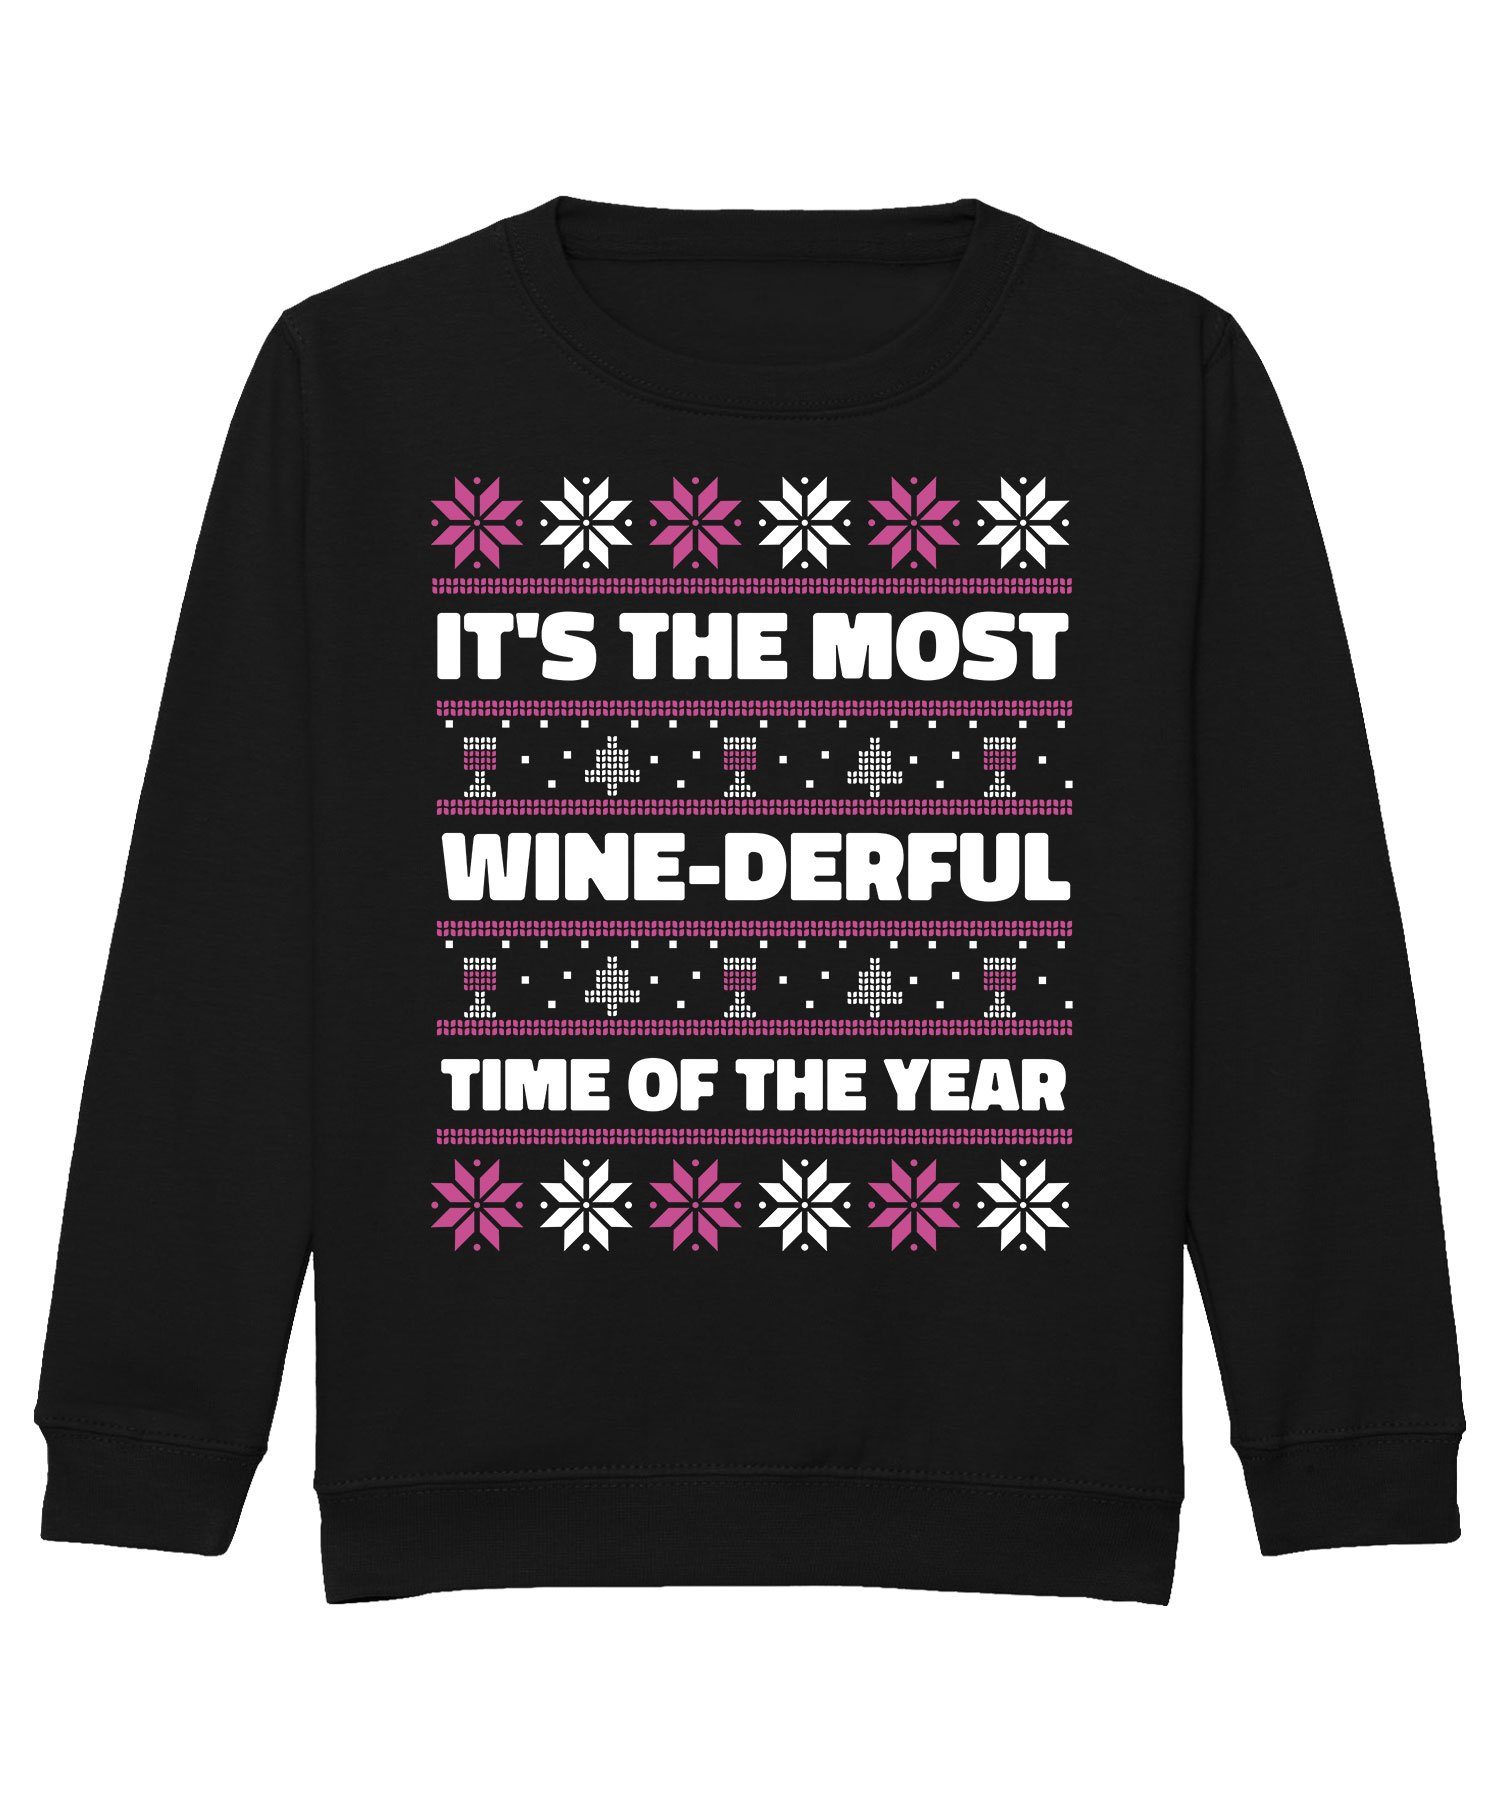 Quattro Formatee Ugly wine-derful (1-tlg) time Sweatshirt most Weinliebhaber year the Christma the of It's